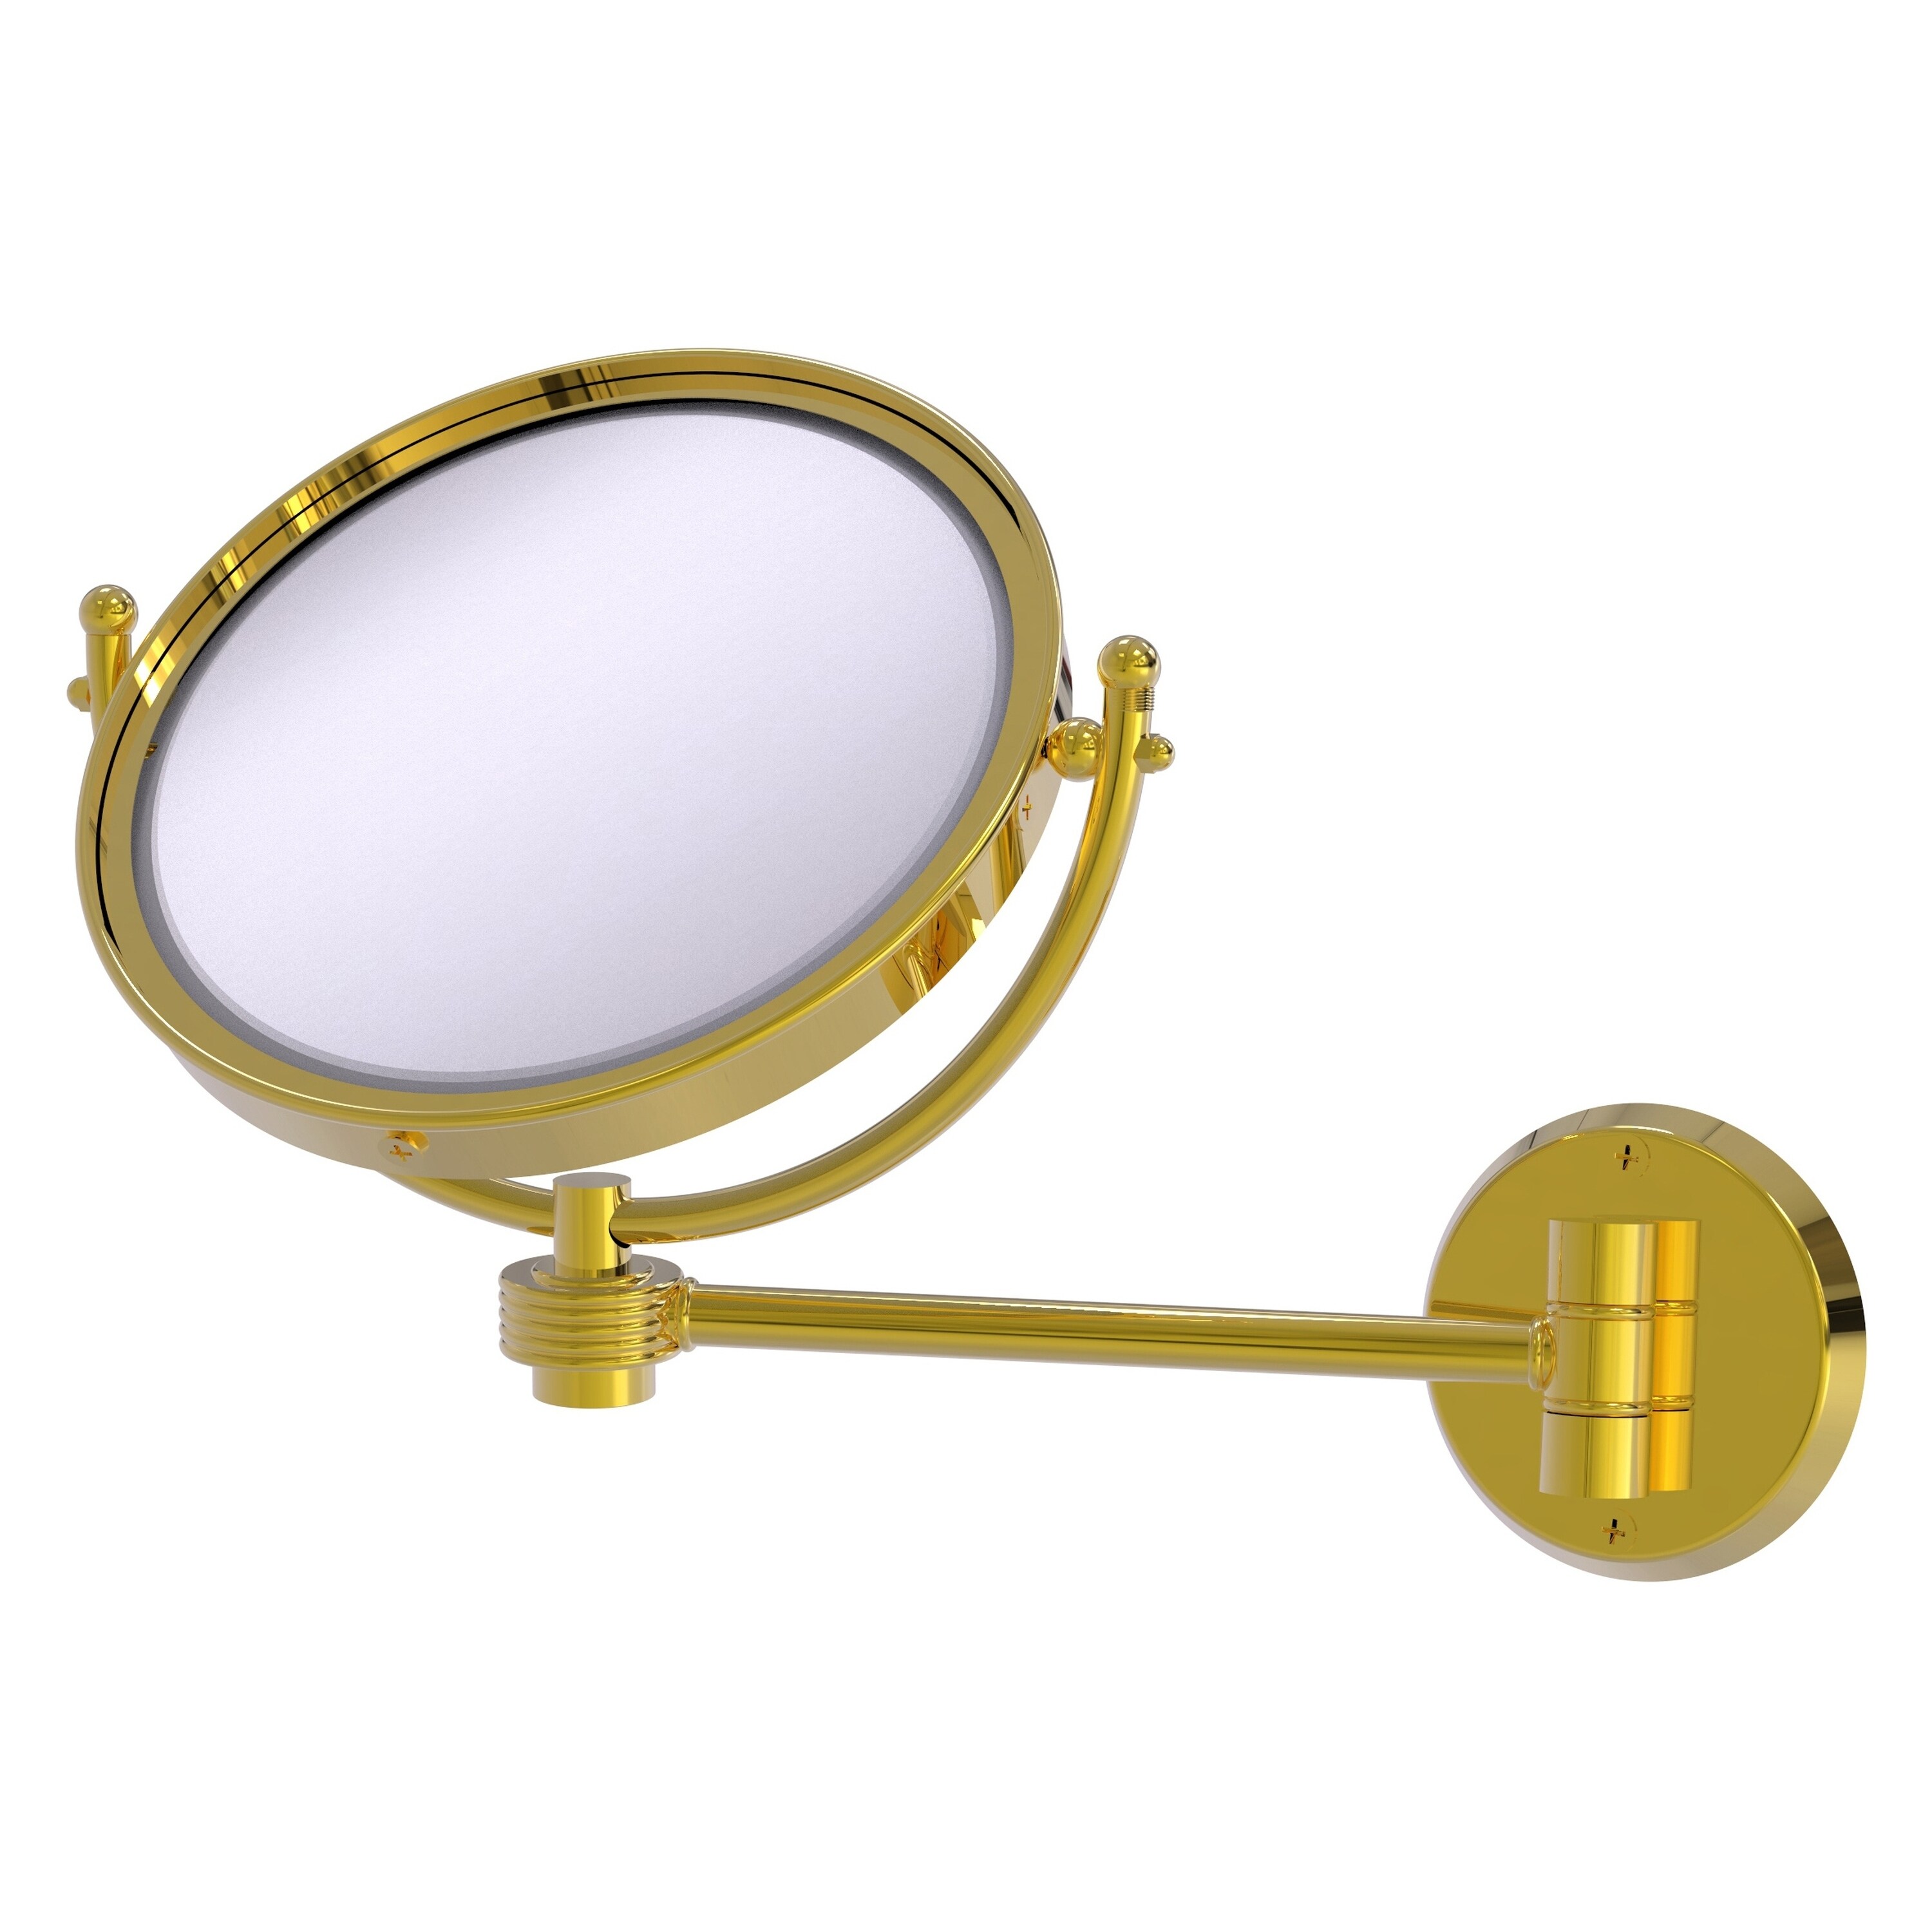 8-in x 10-in Polished Silver Double-sided 5X Magnifying Wall-mounted Vanity Mirror | - Allied Brass WM-5G/5X-PB